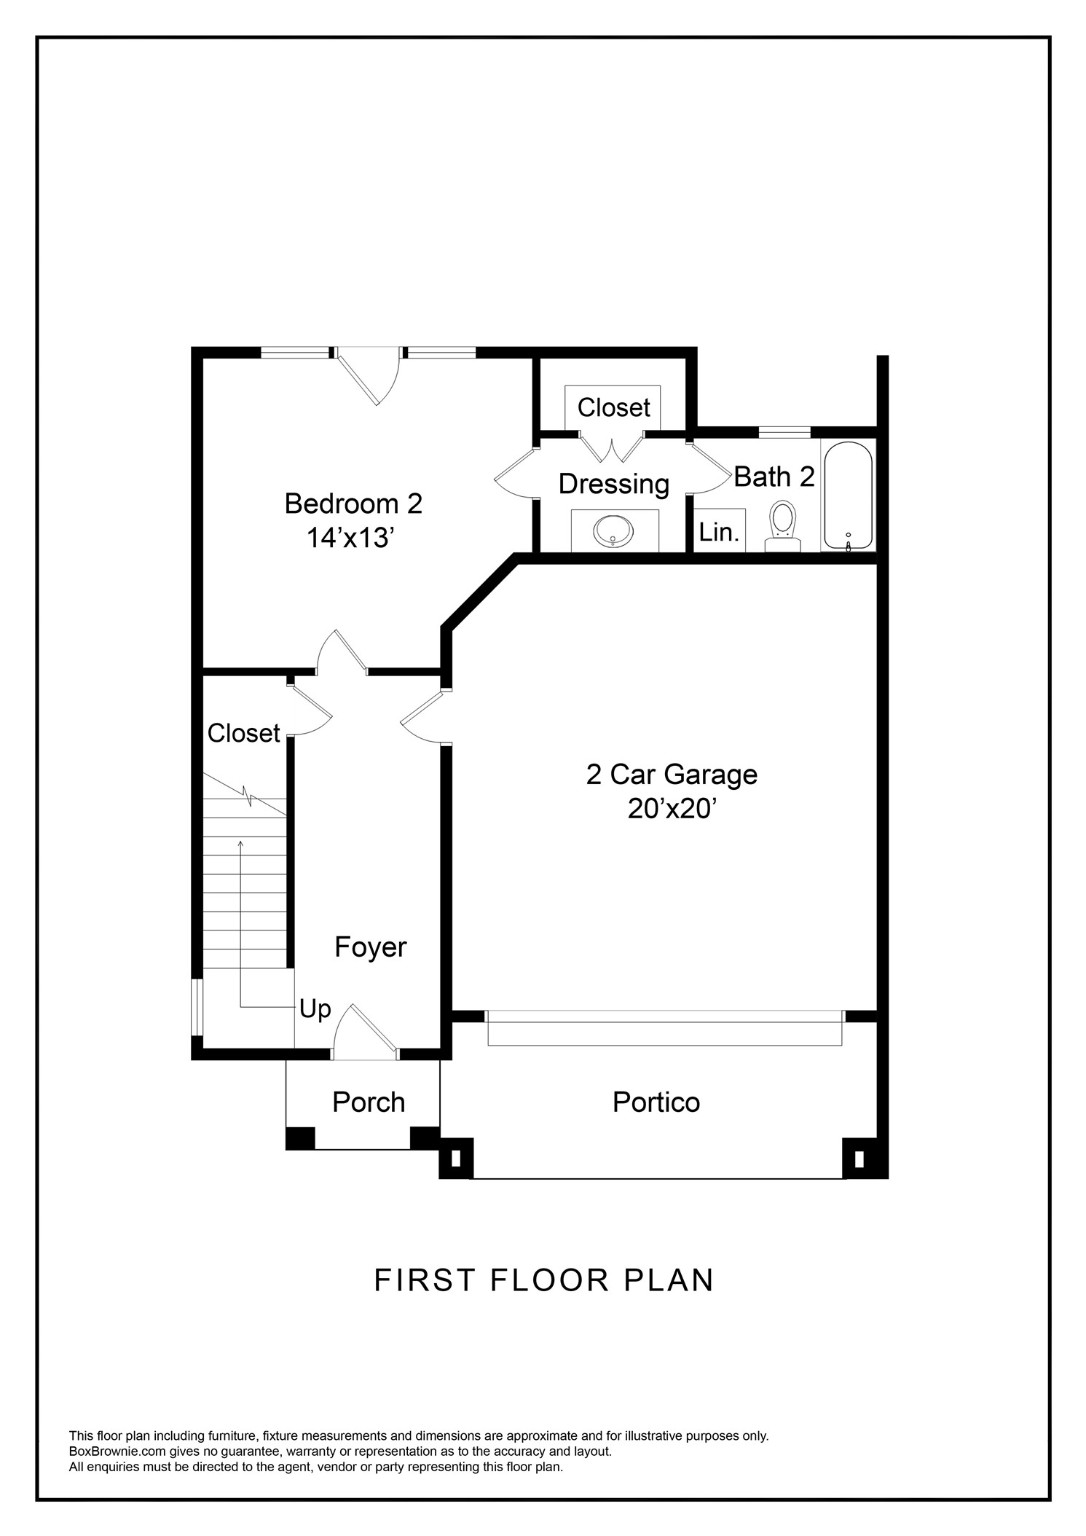 The first floor features a large foyer with high ceilings, en suite bedroom with a walk in closet, dressing area and bath with tub/shower combo.